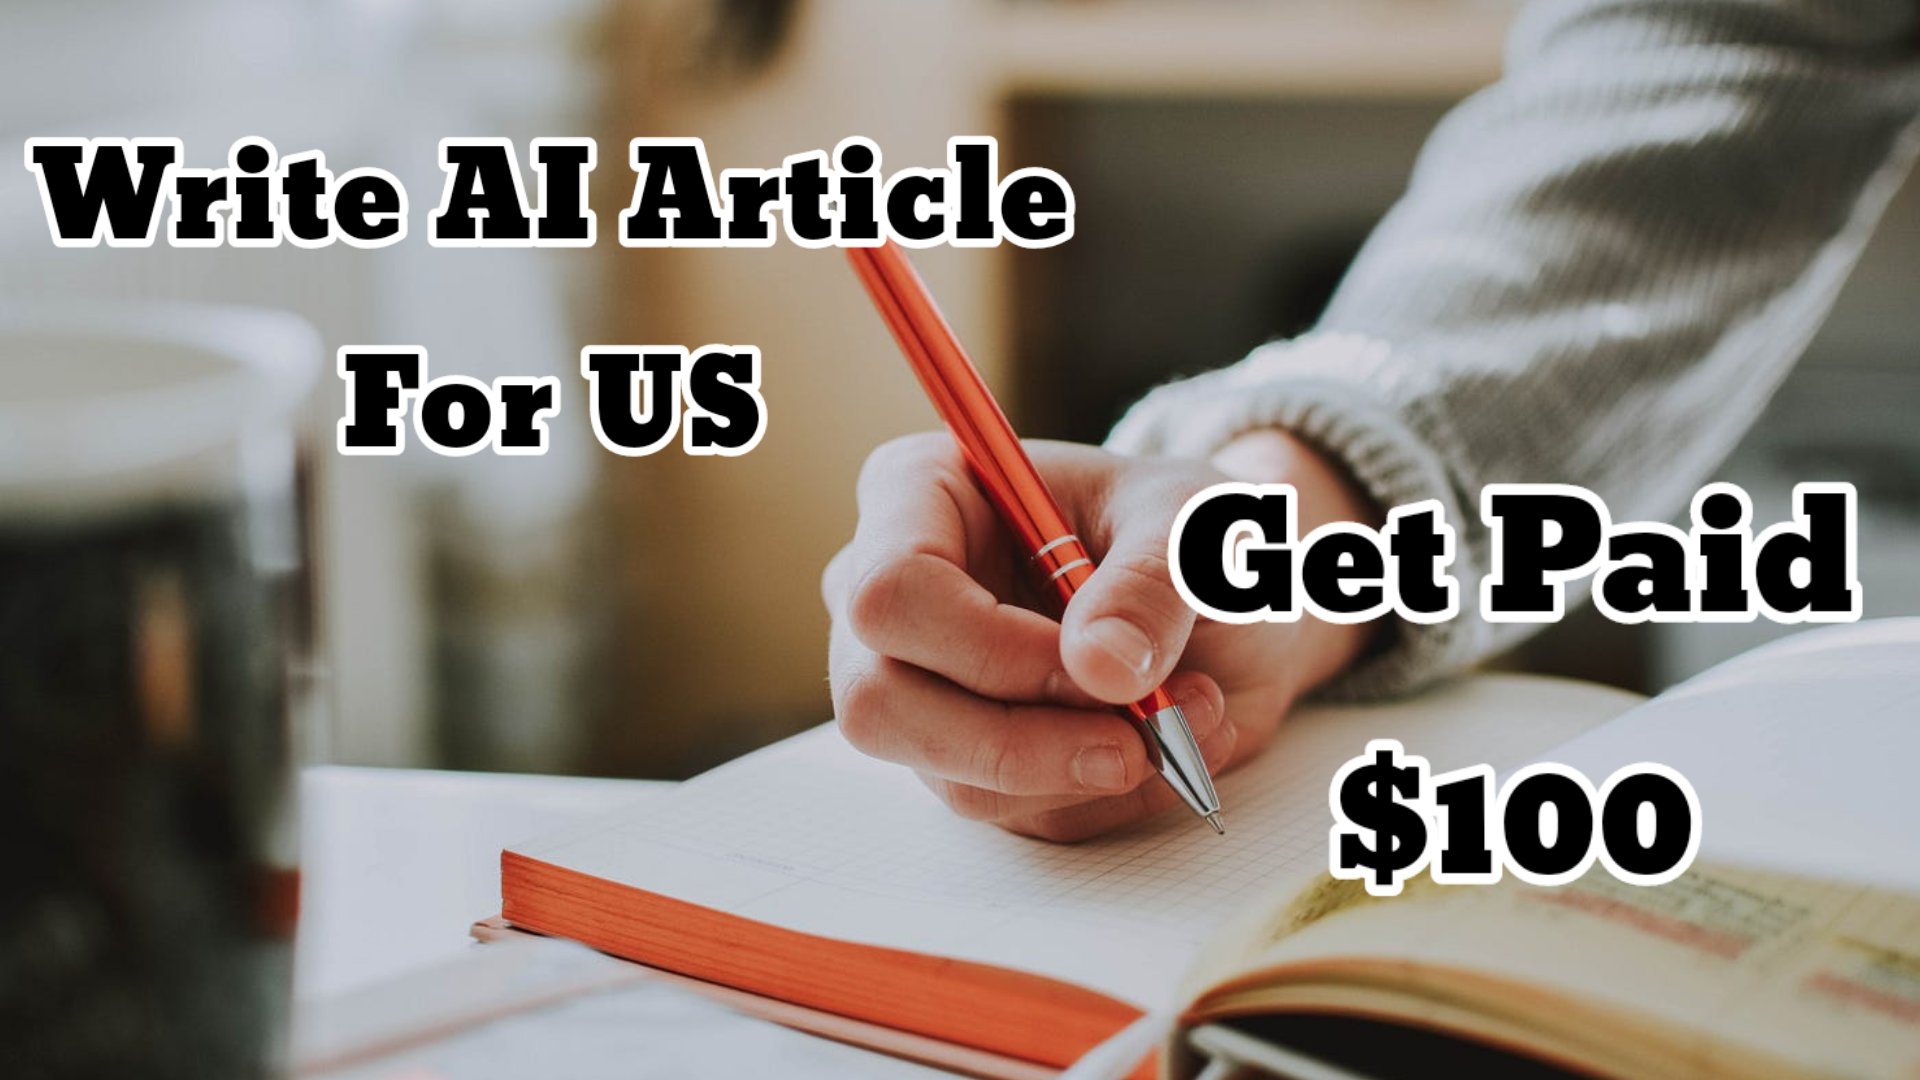 Write AI Article for US and Get Paid $100